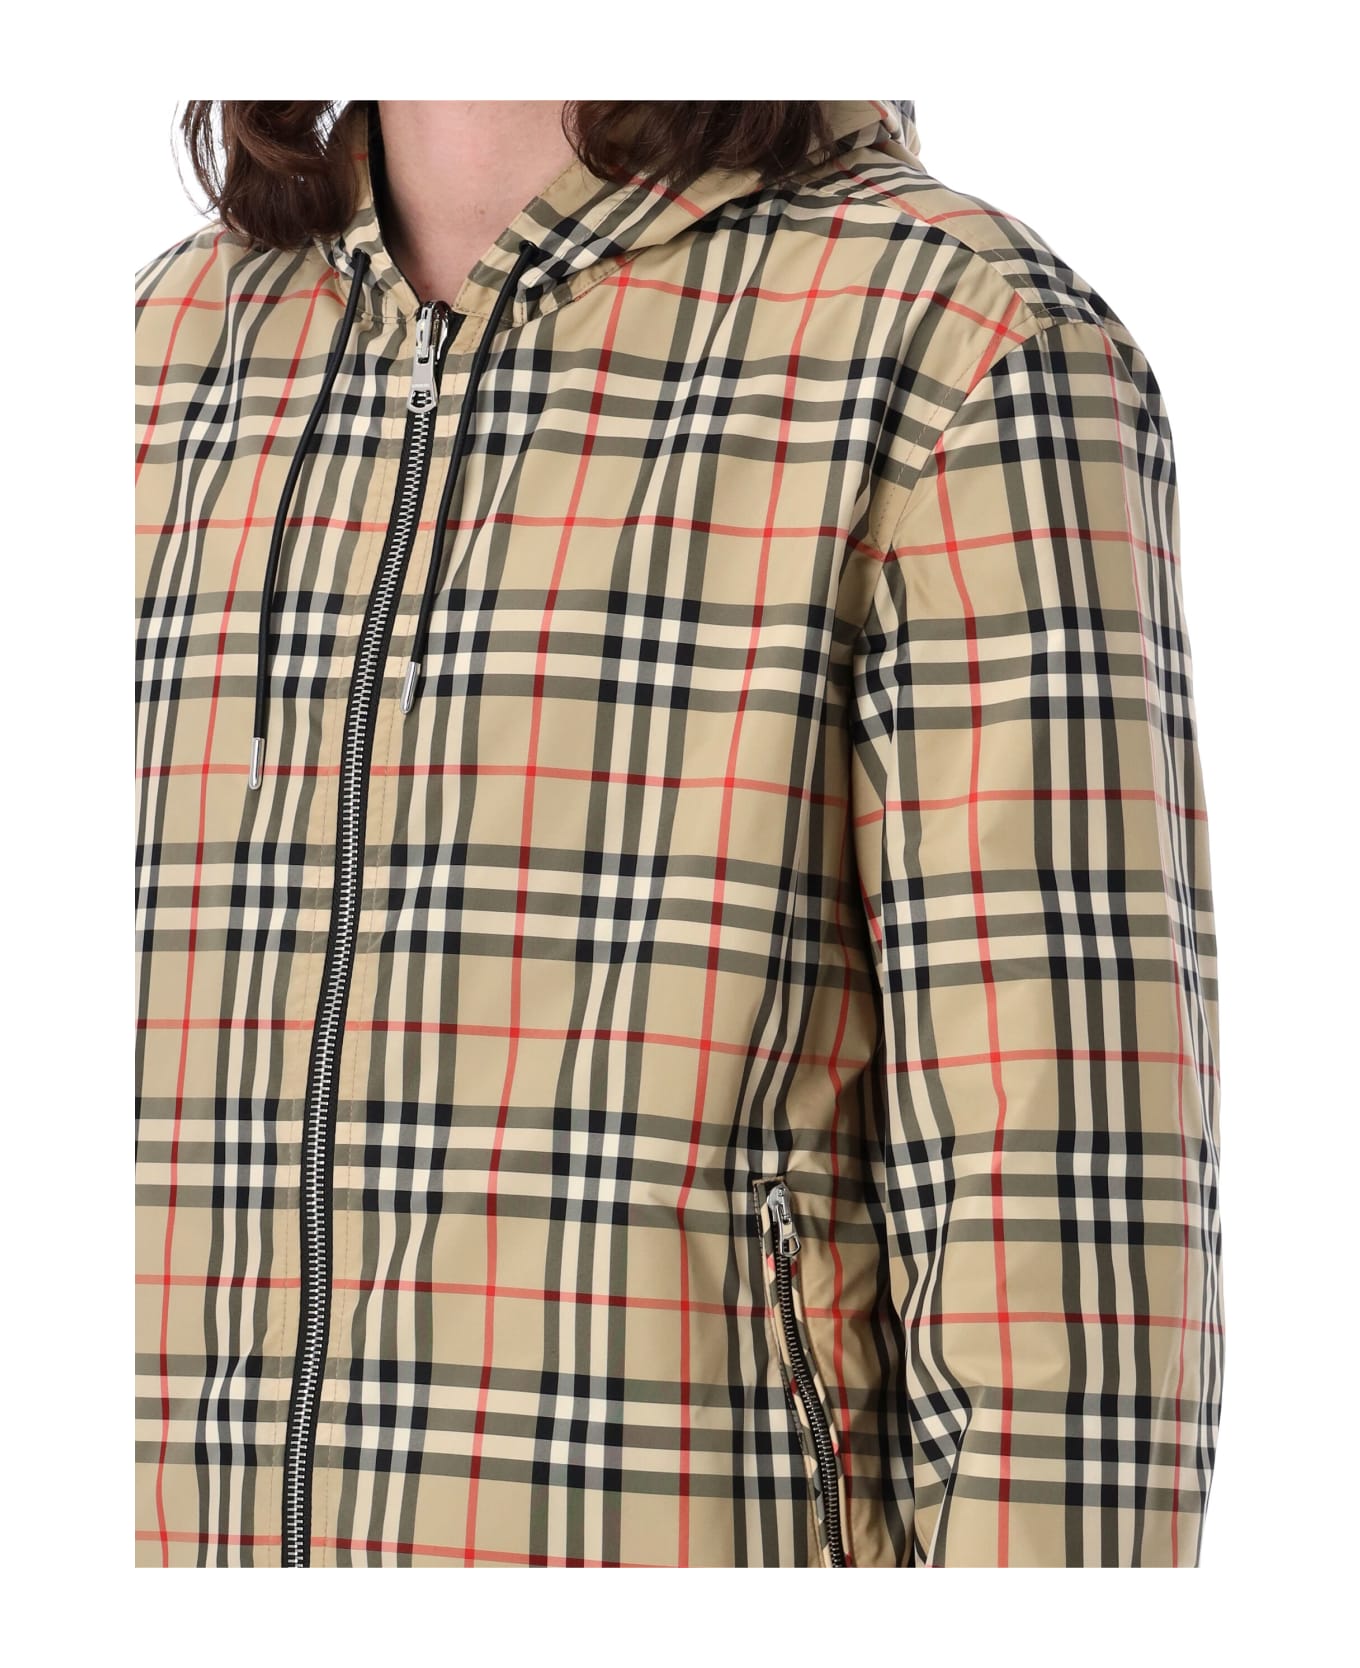 Burberry London Reversible Check Jacket - ARCHIVE BEIGE IP CHK